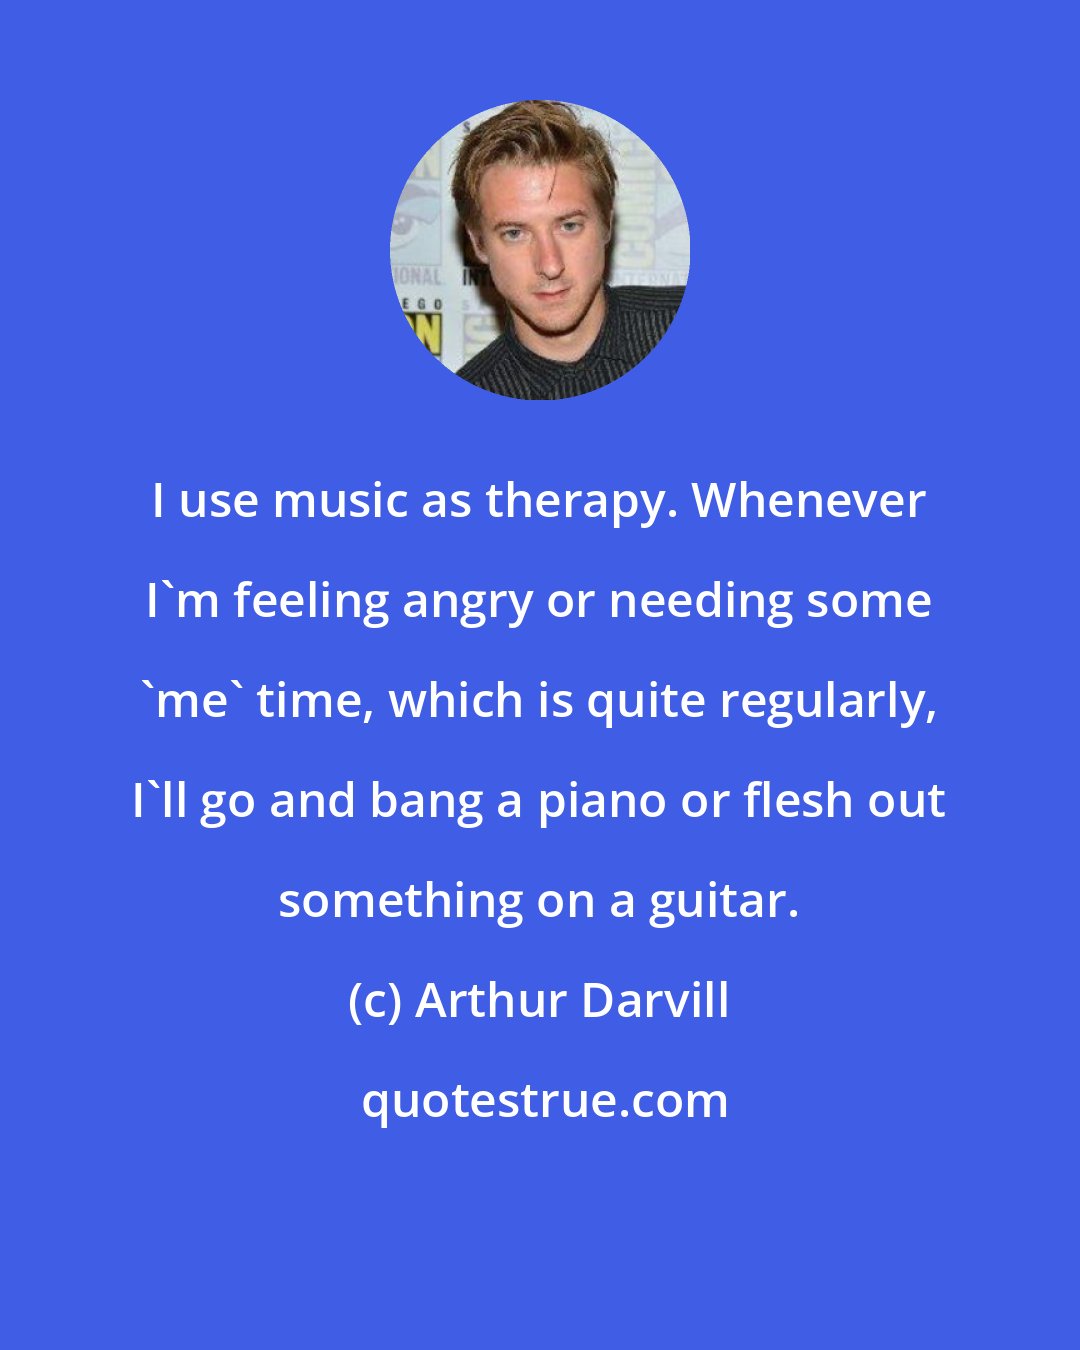 Arthur Darvill: I use music as therapy. Whenever I'm feeling angry or needing some 'me' time, which is quite regularly, I'll go and bang a piano or flesh out something on a guitar.